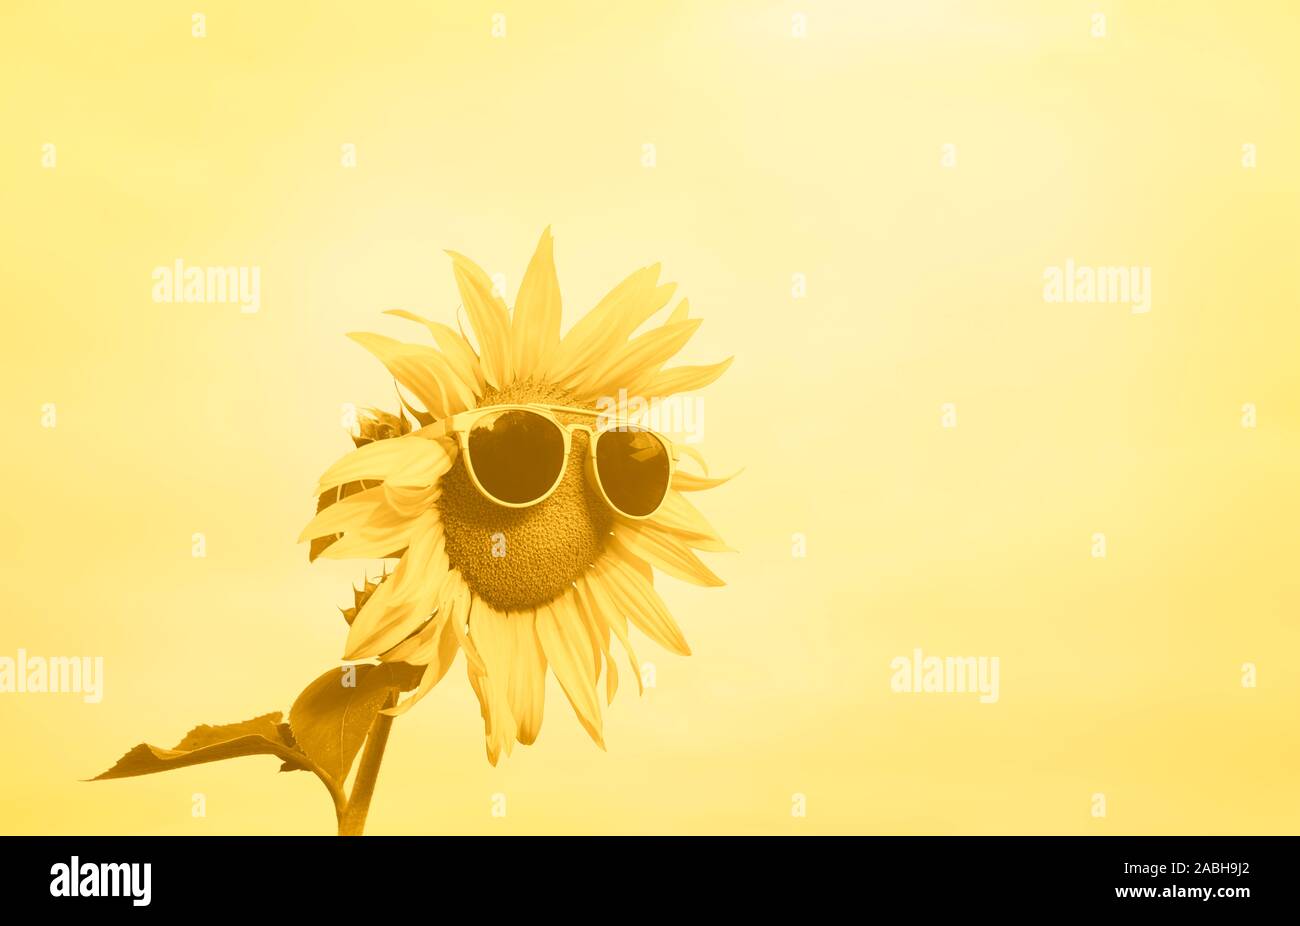 Monochrome sunflower with sunglasses against a yellow background. Summer background in yellow shades. Summer colors and funny sunflower. Summer heat. Stock Photo